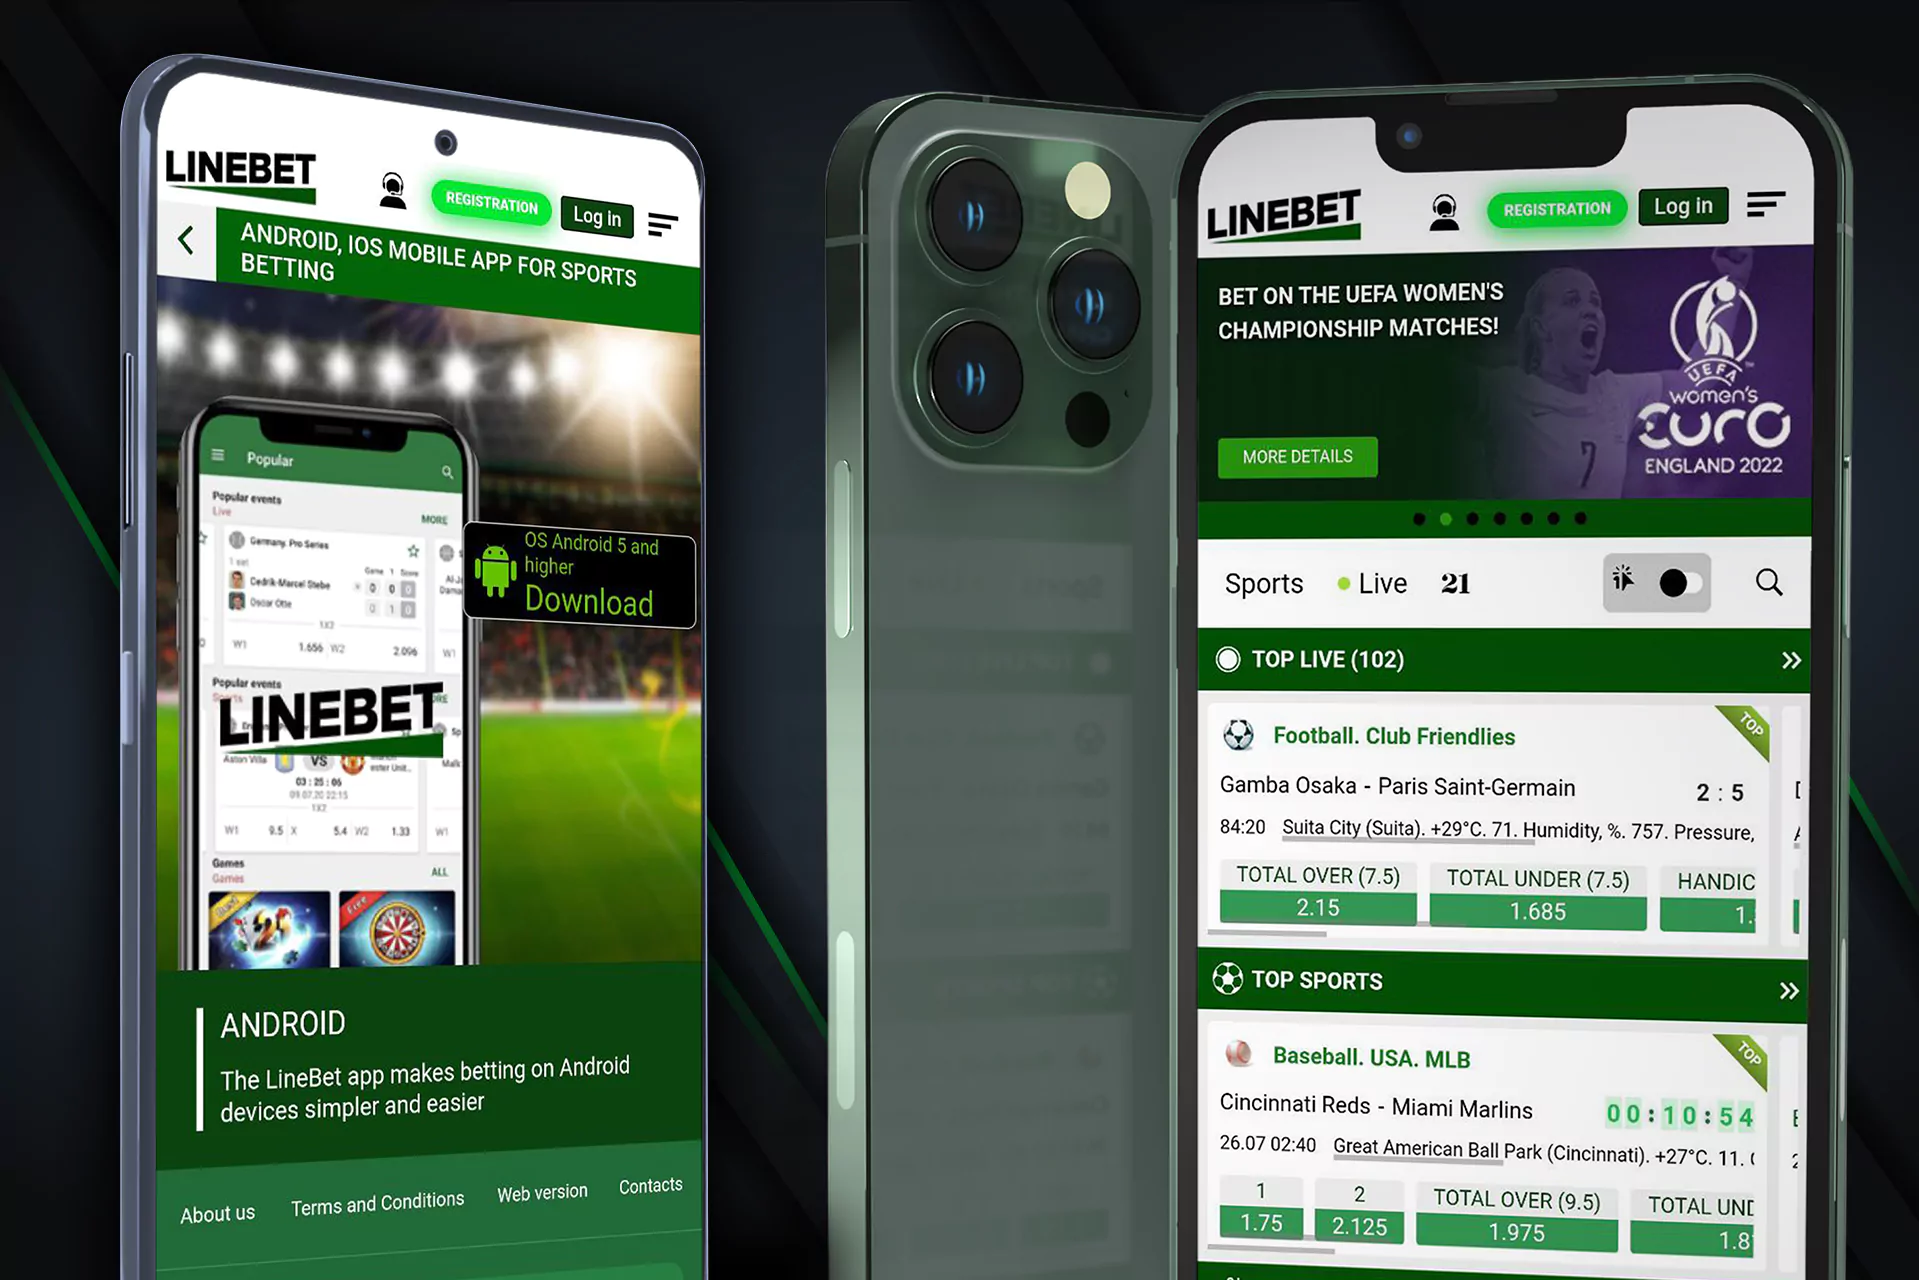 You can download Kinebet apps on your Android or iOS devices.